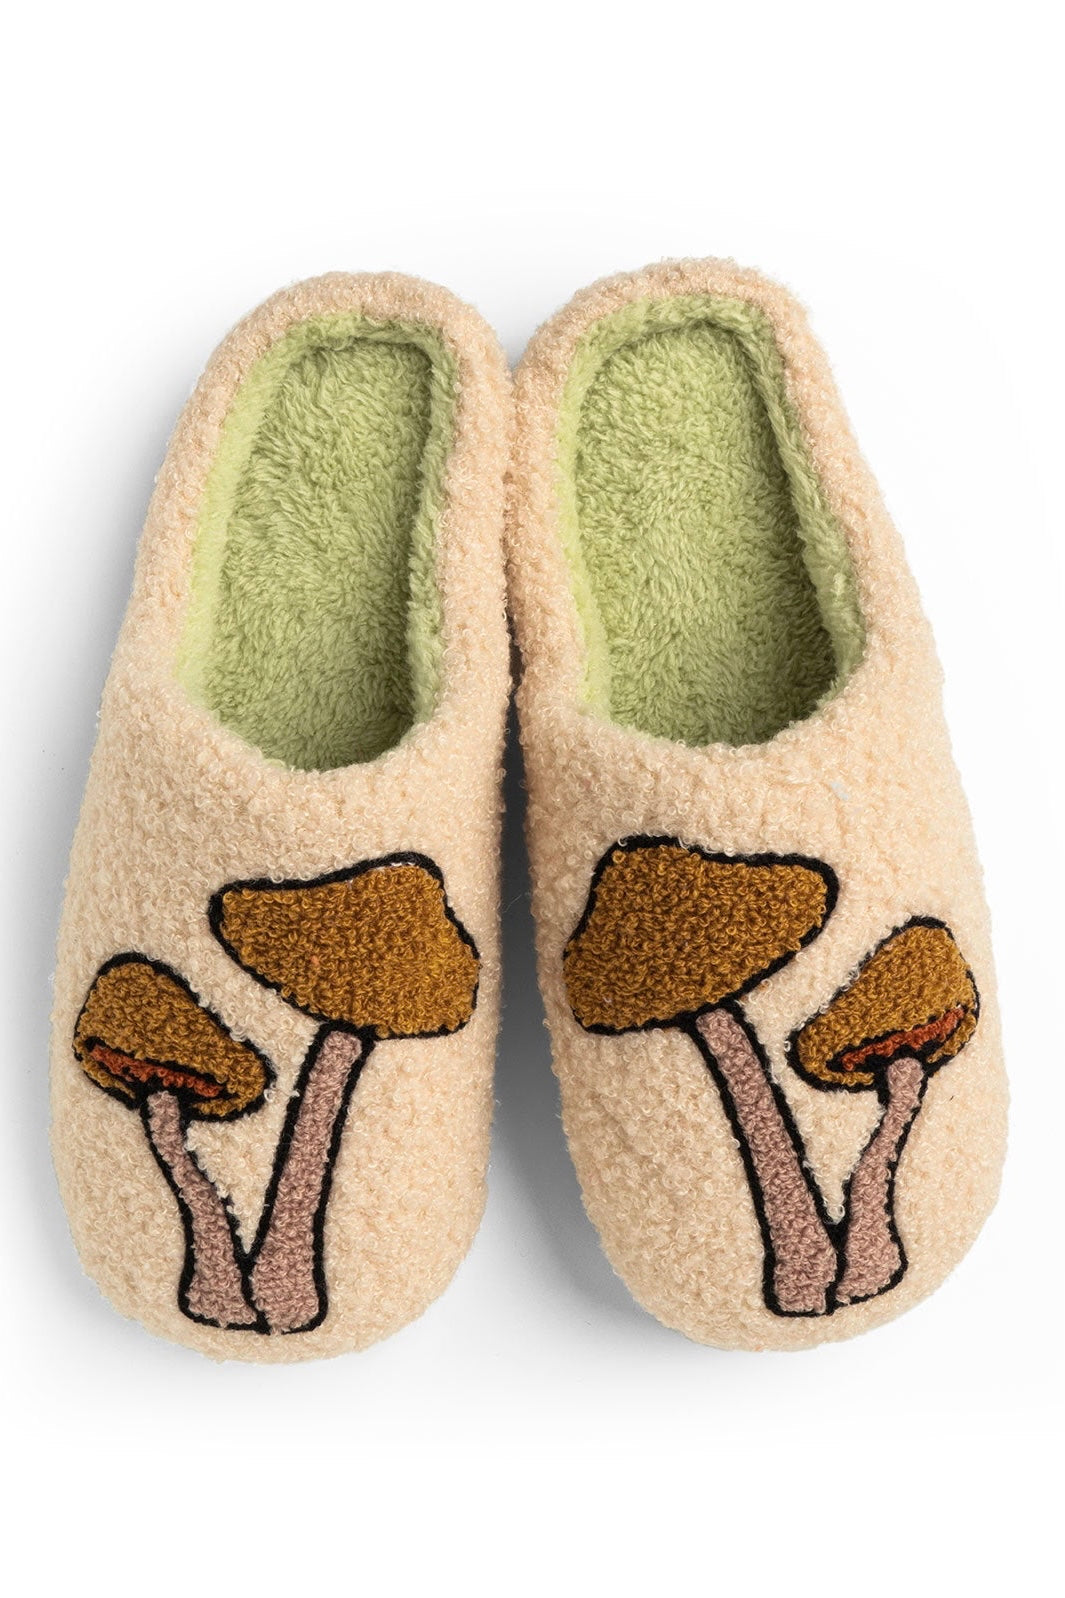 Two Left Feet-Slippers - The Rusty Willow Boutique